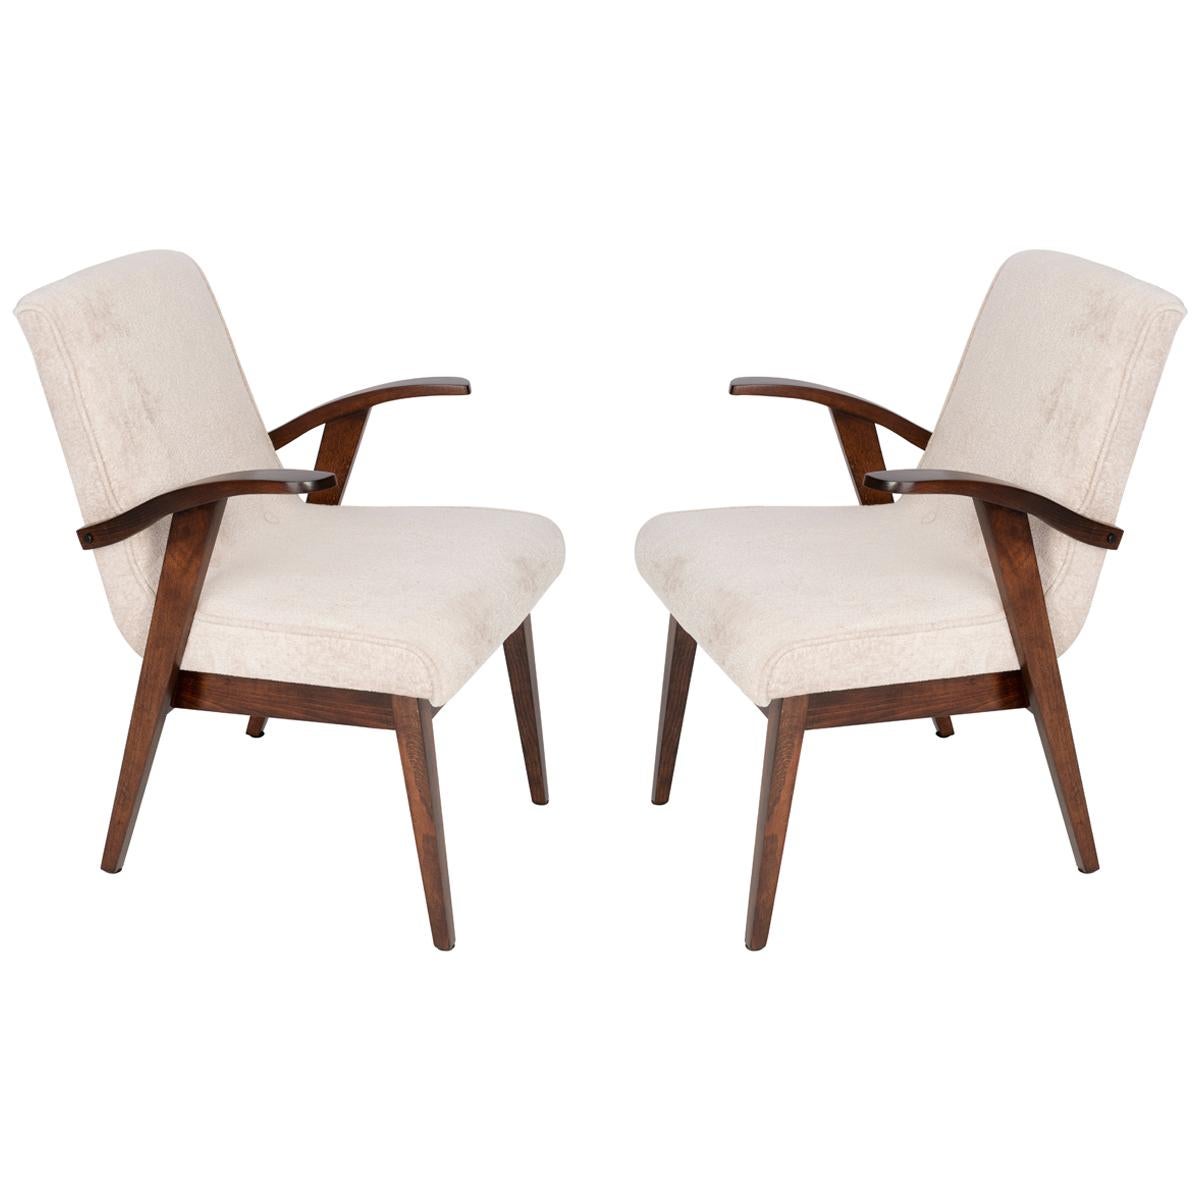 Set of Two 20th Century Light Cream Armchairs by Mieczyslaw Puchala, 1960s